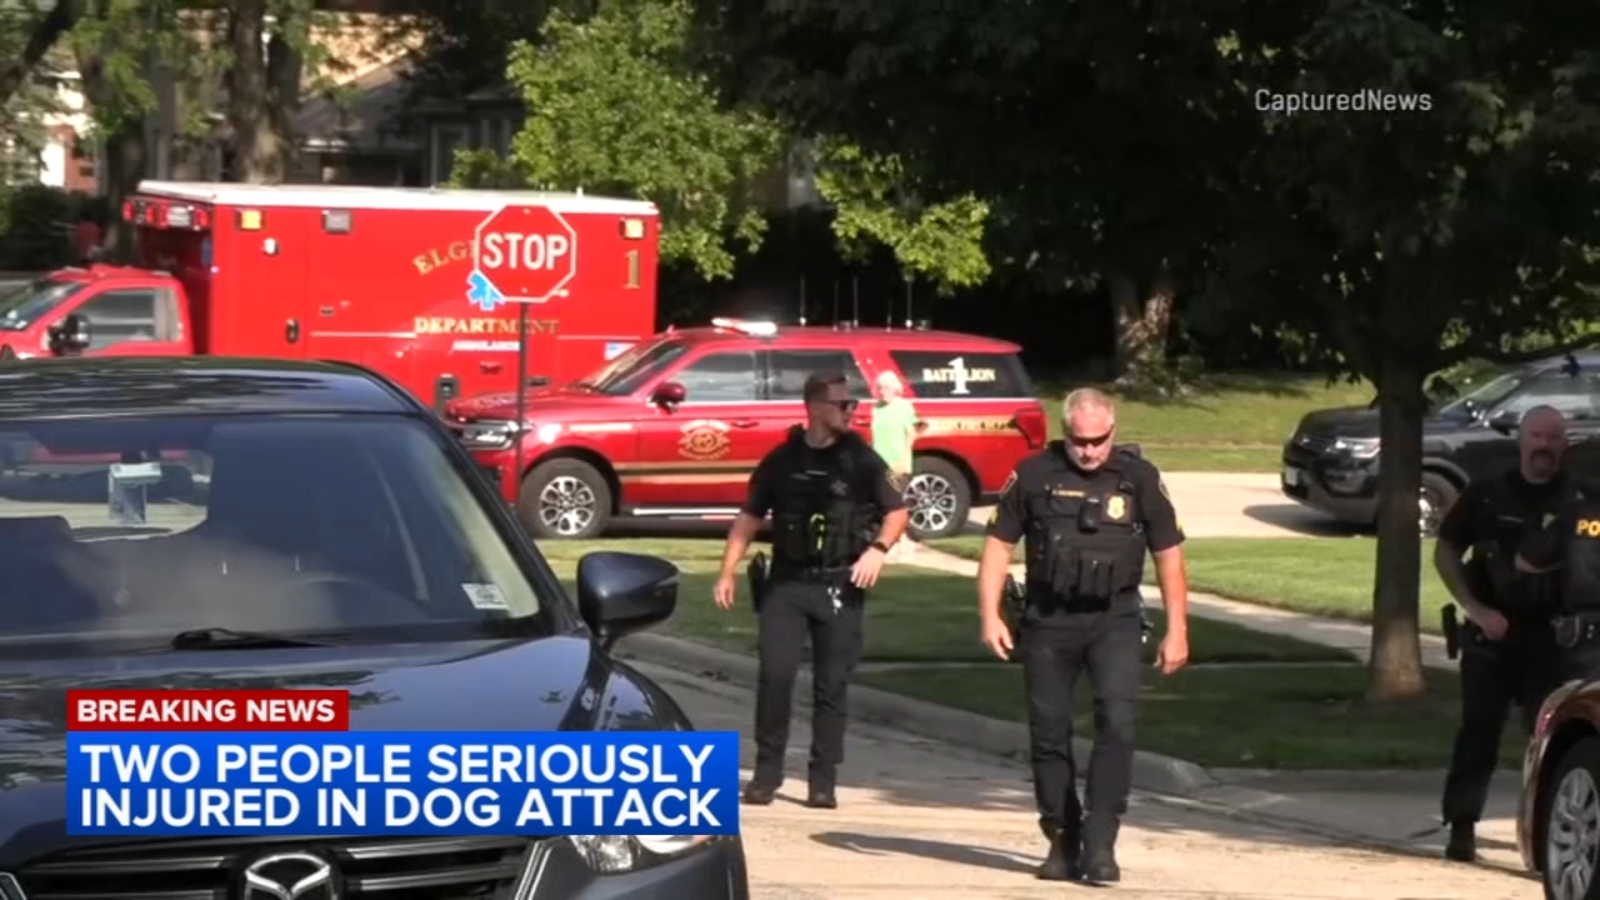 Elgin police shoot, kill dog that was attacking owners while on a walk; injuries are non-life threatening, officials say [Video]